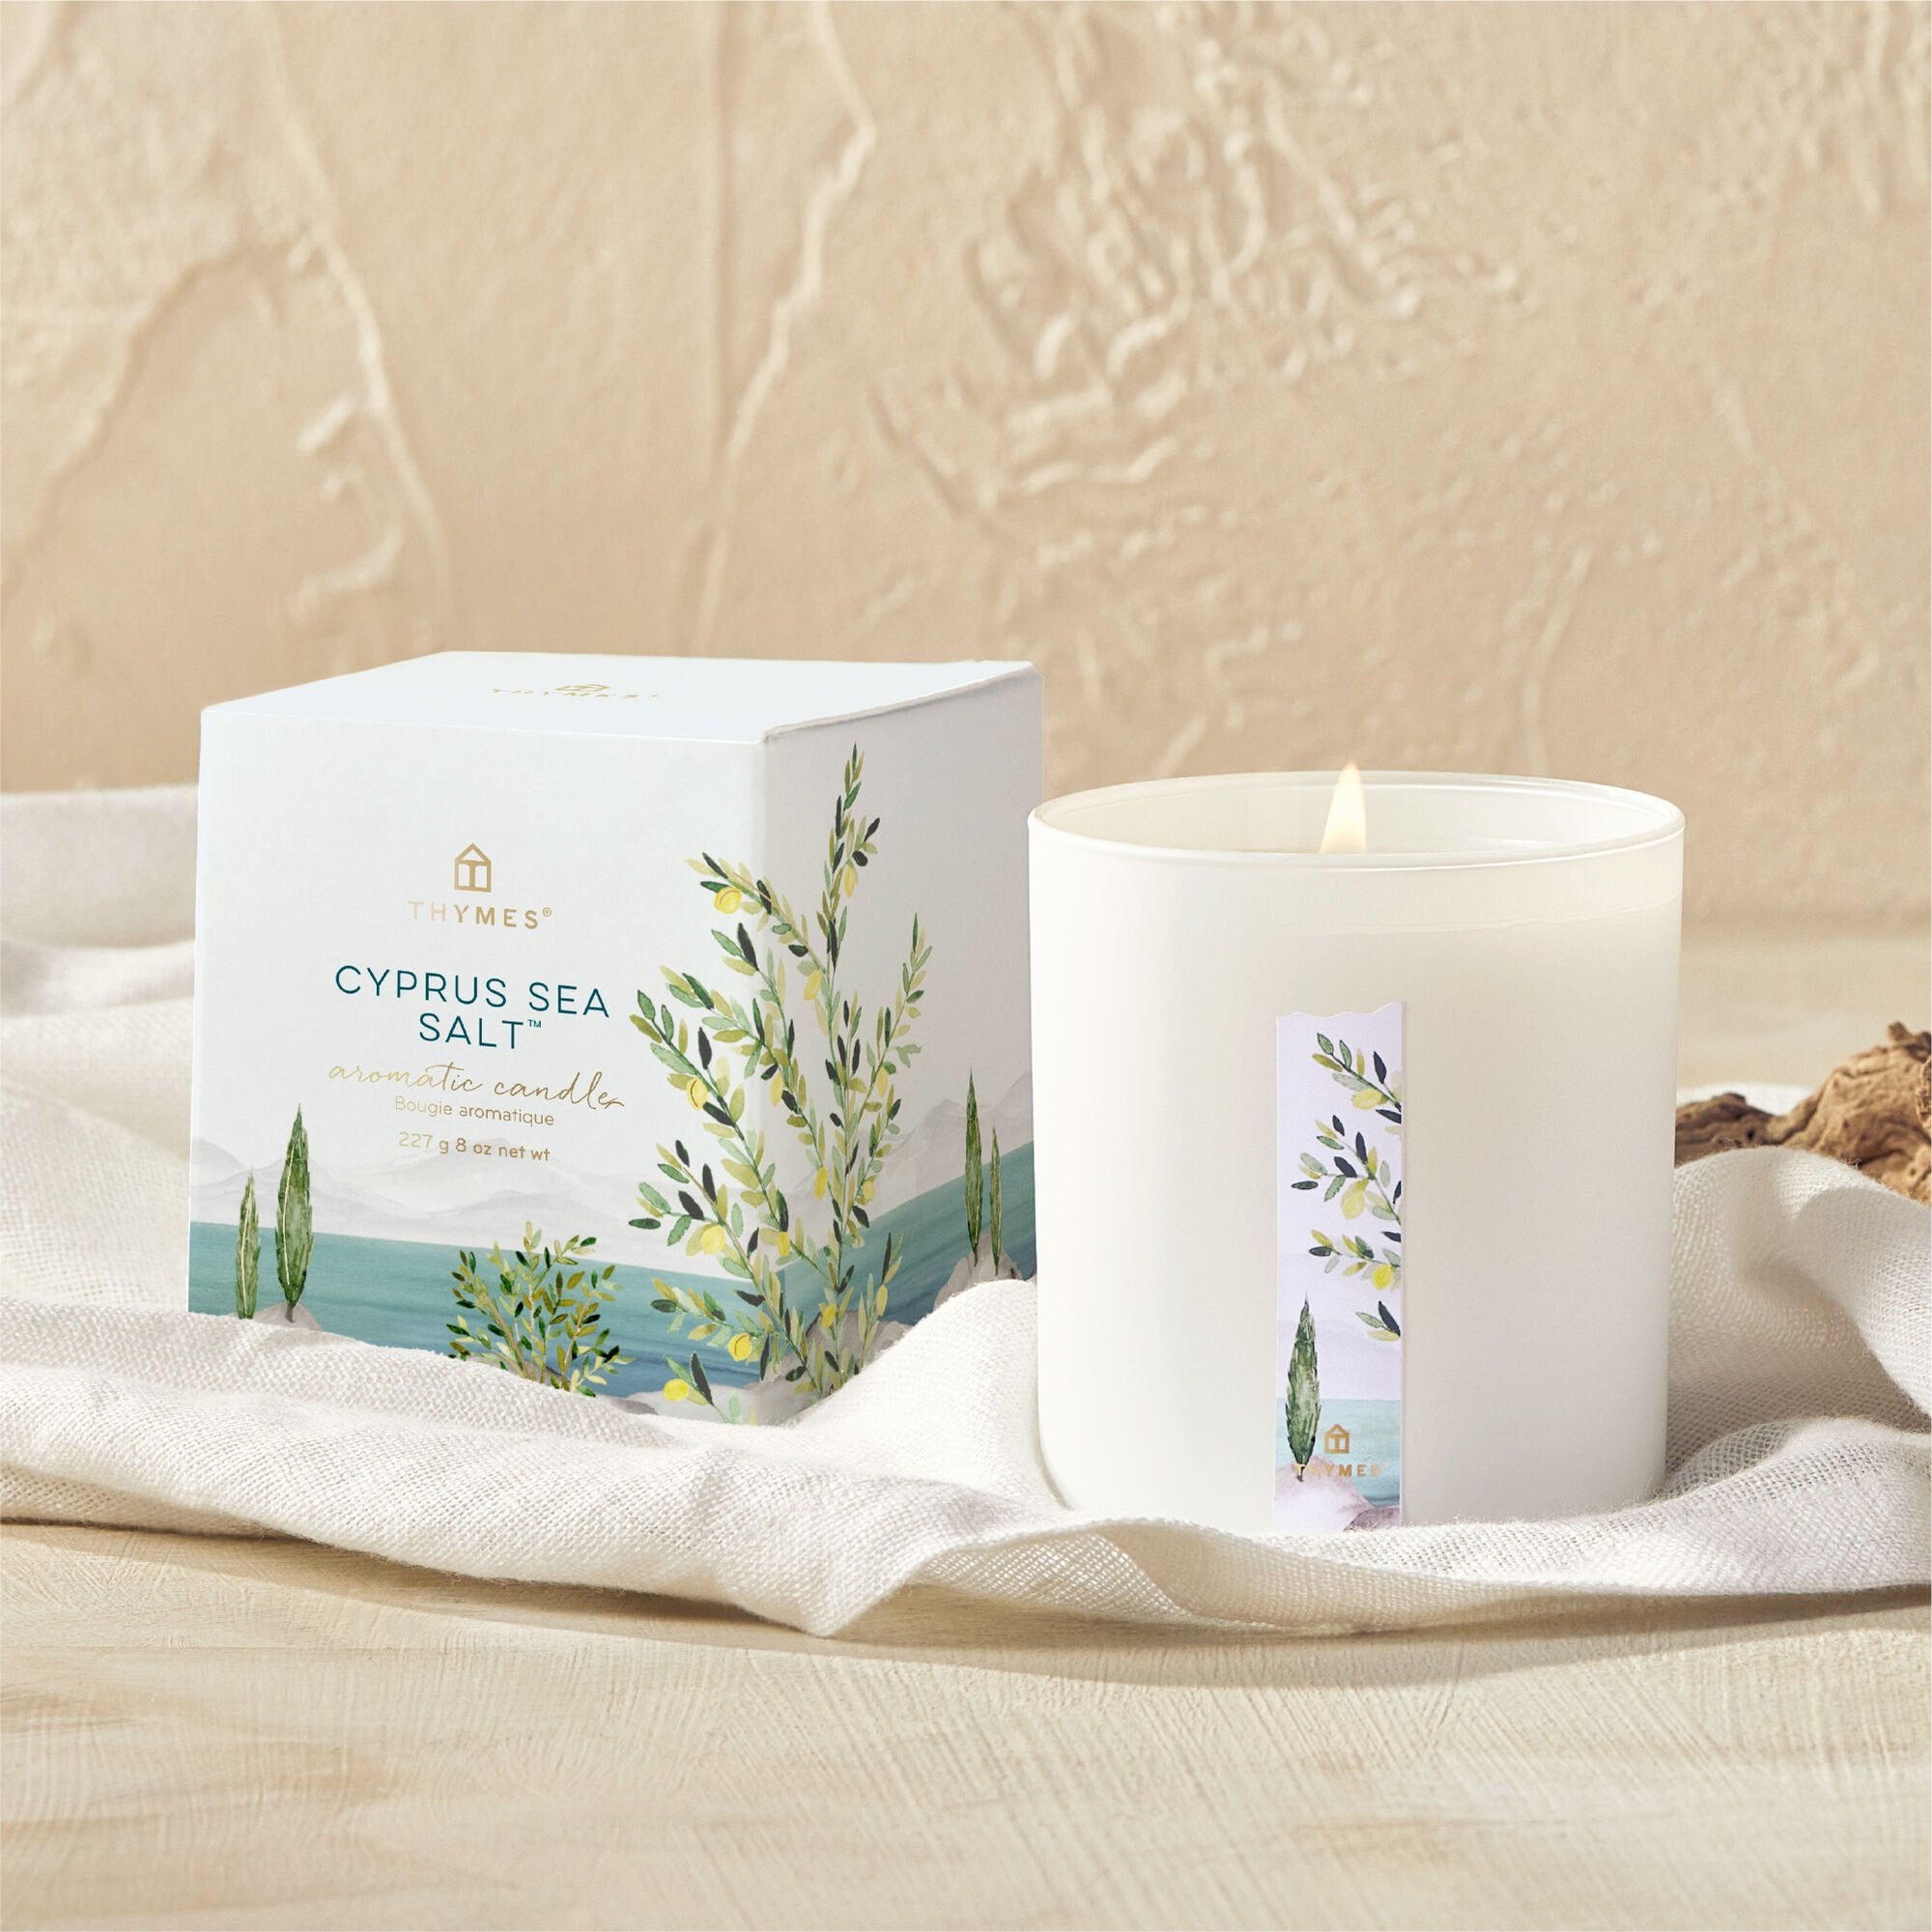 2-thymes-cyprus-sea-salt-poured_20candle.jpg